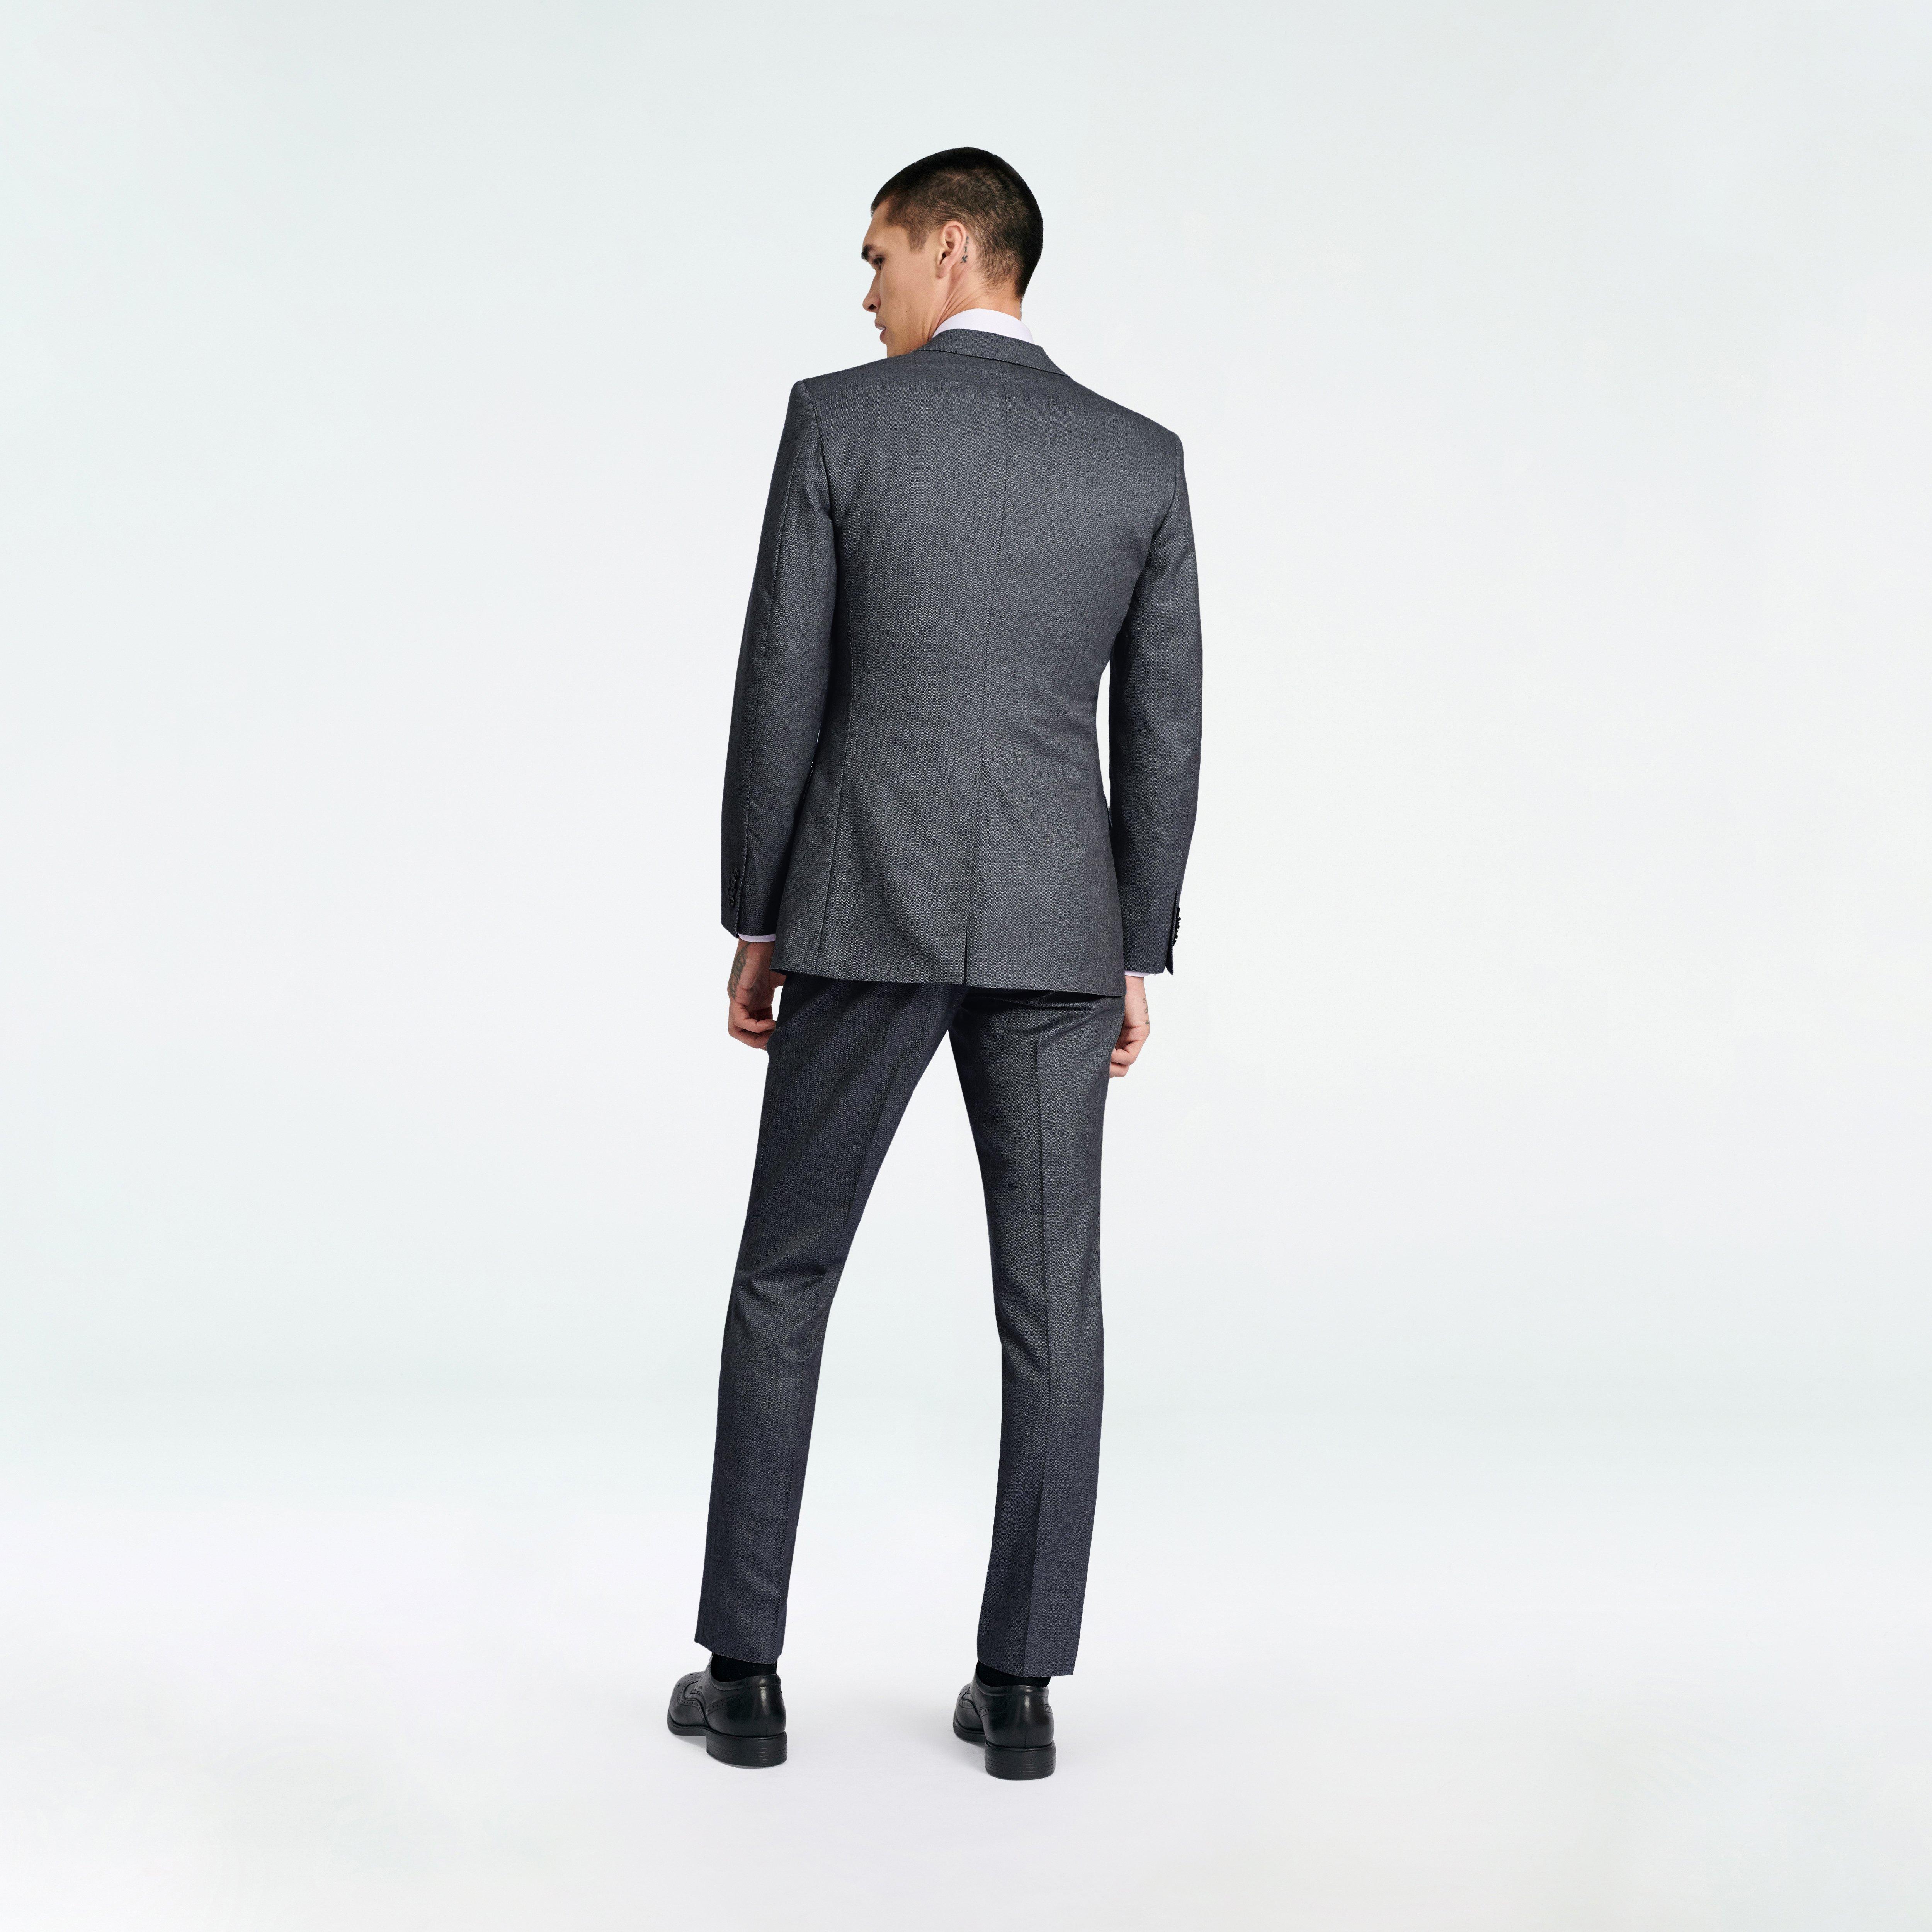 Custom Suits Made For You - Prescot Herringbone Charcoal Suit | INDOCHINO